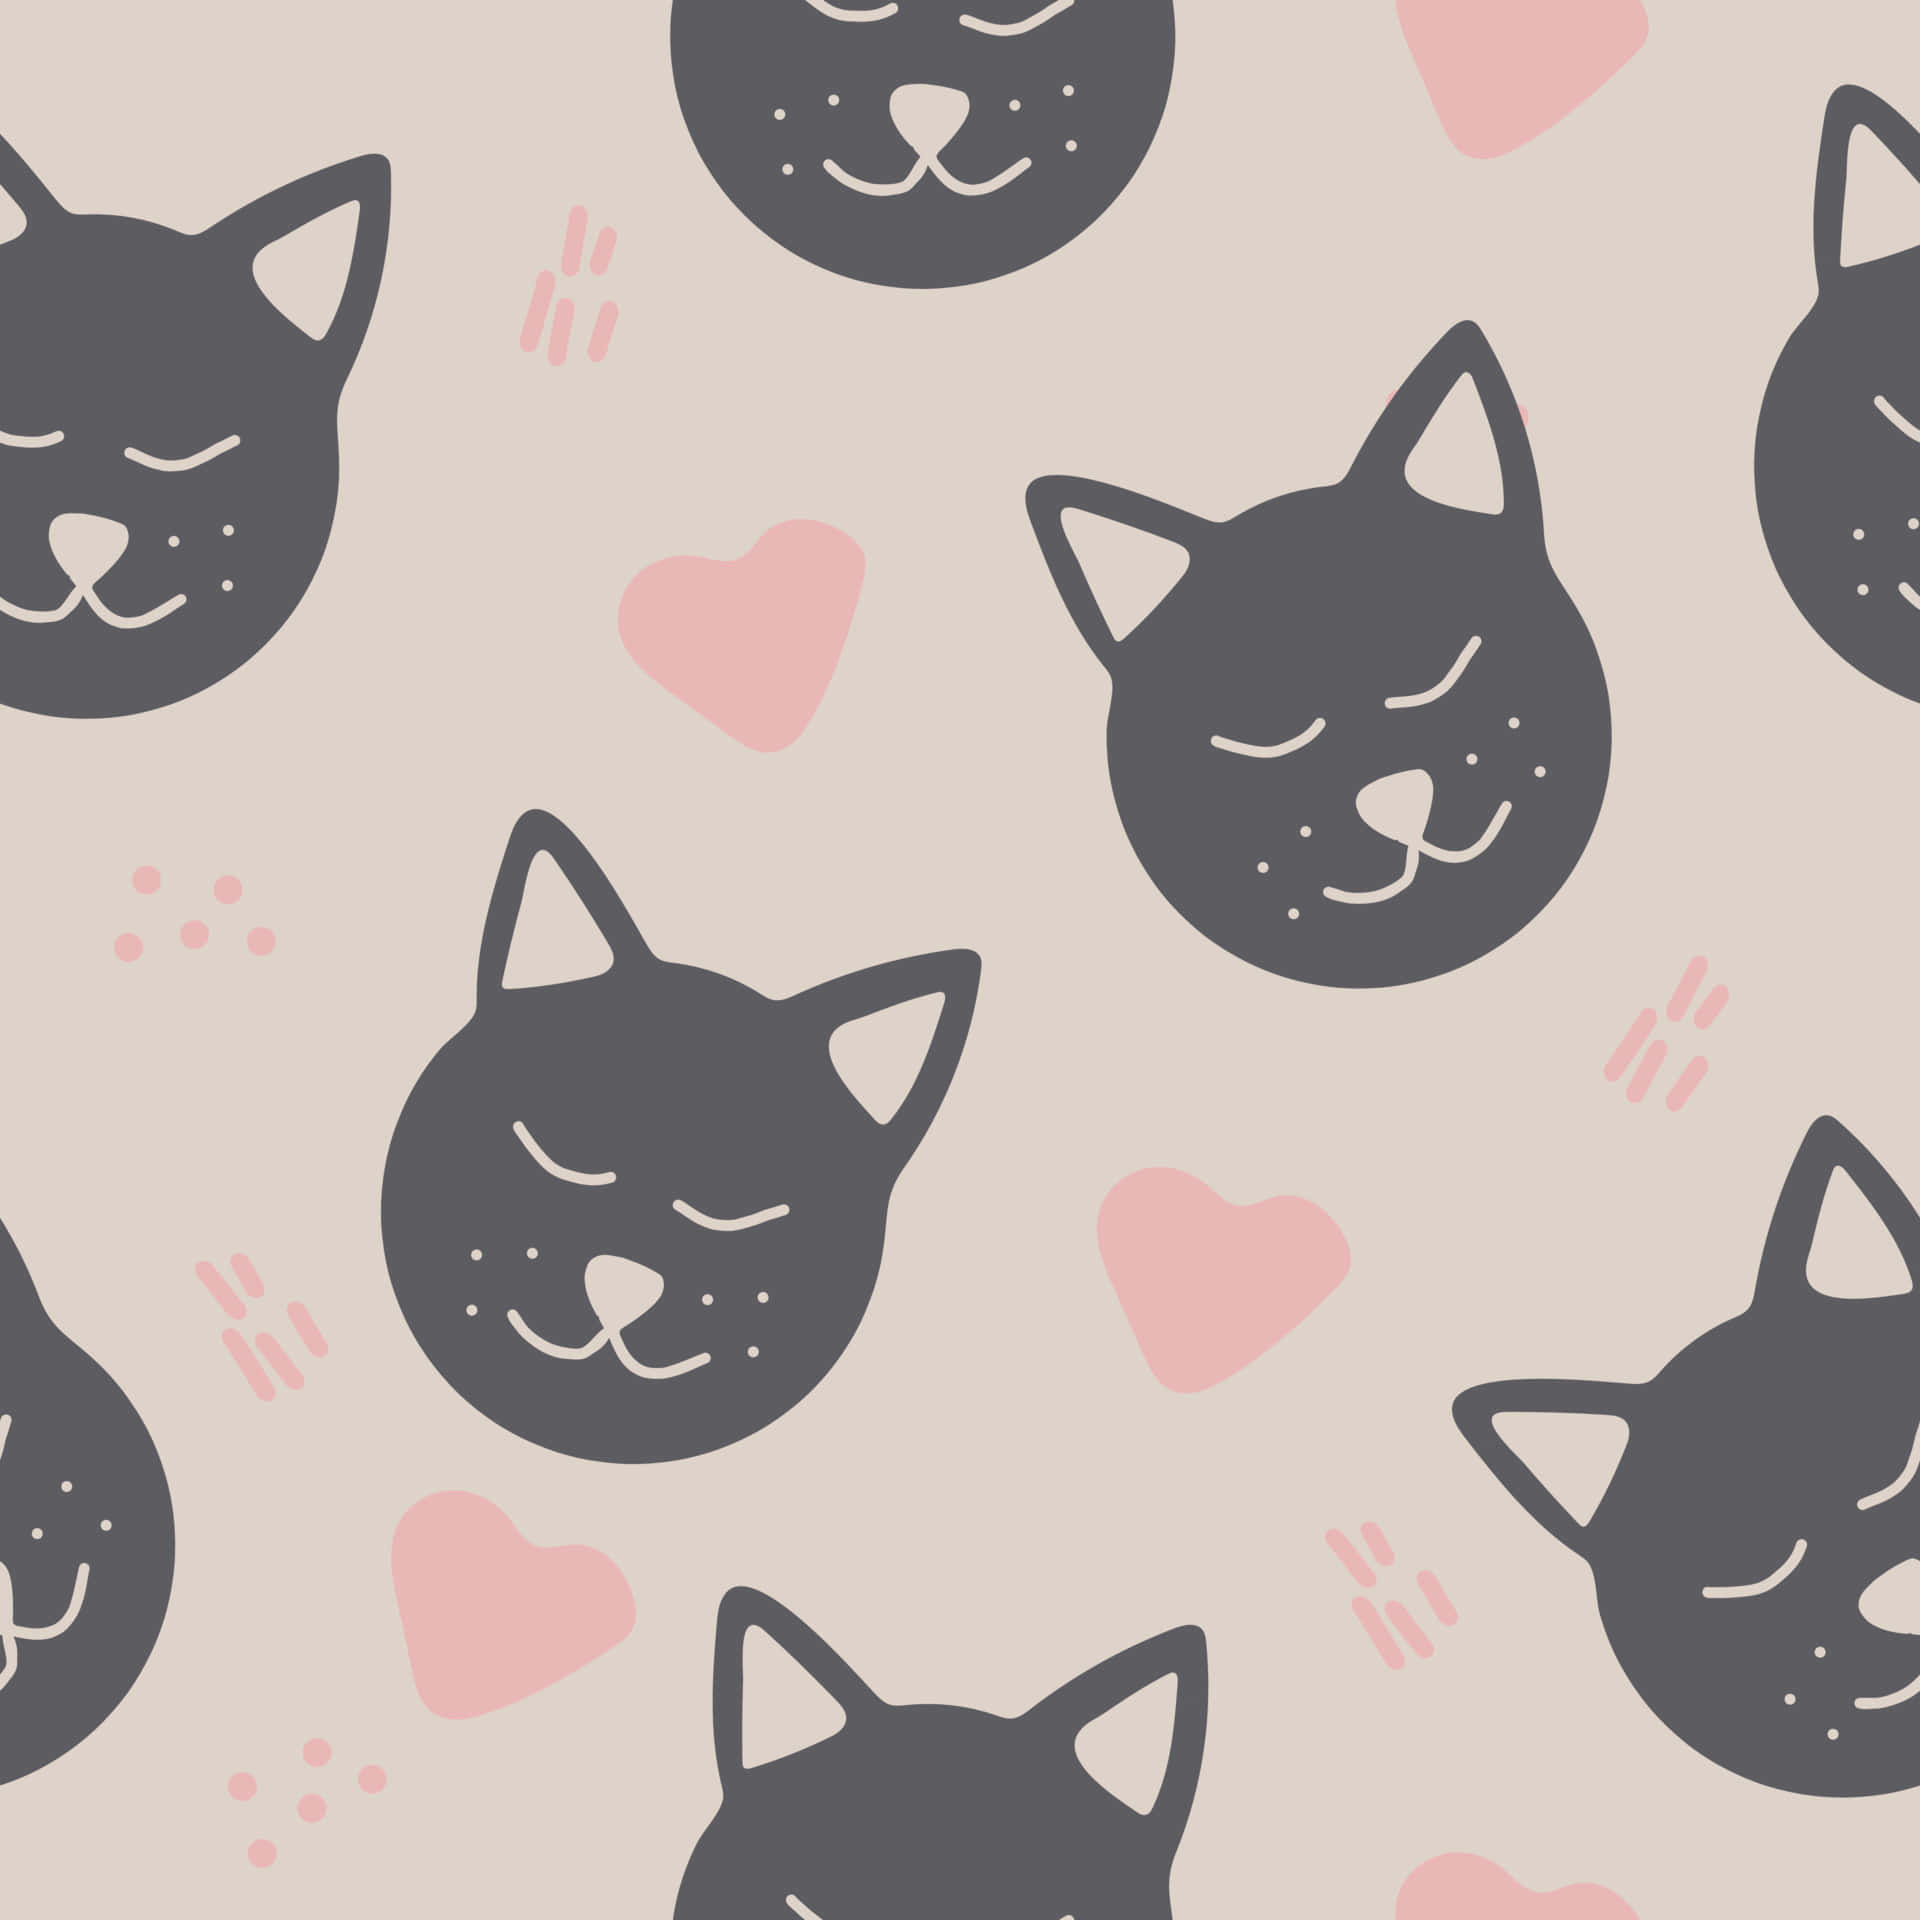 A Seamless Pattern Of Cats With Hearts And Hearts Wallpaper